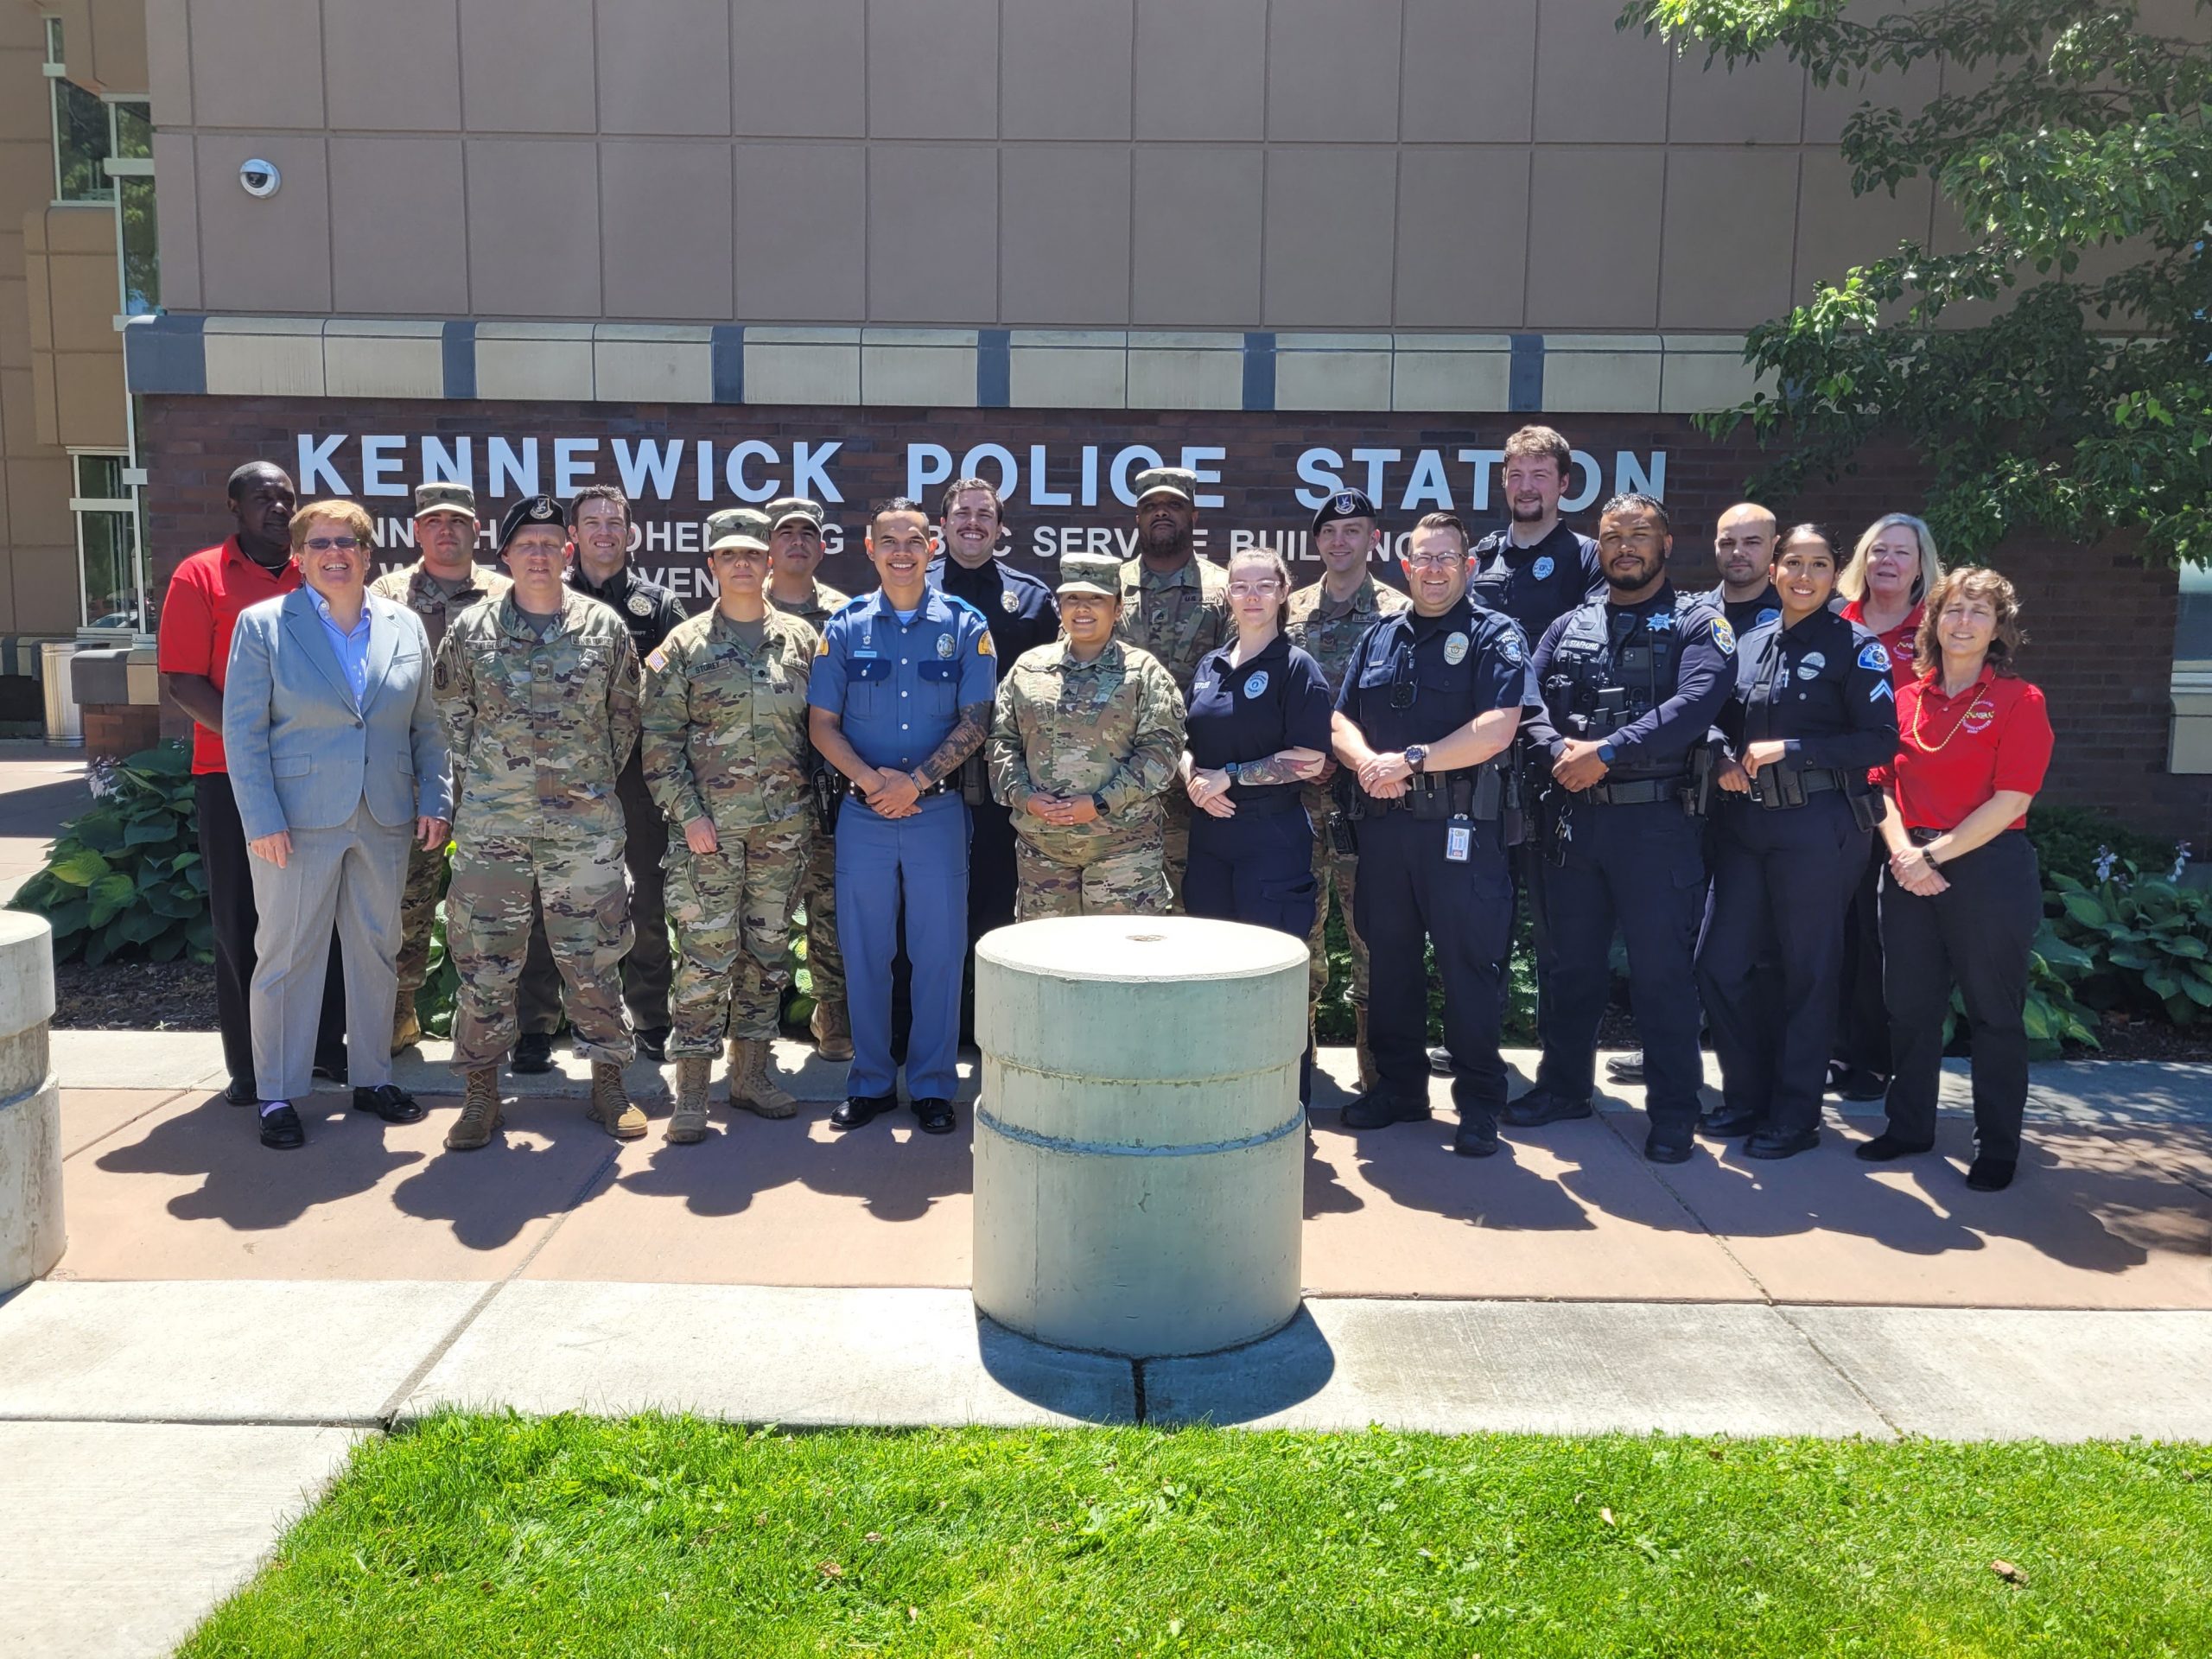 Class Photo from the D.A.R.E. Officer Training held on June 20 – July 1, 2022 in Kennewick, WA